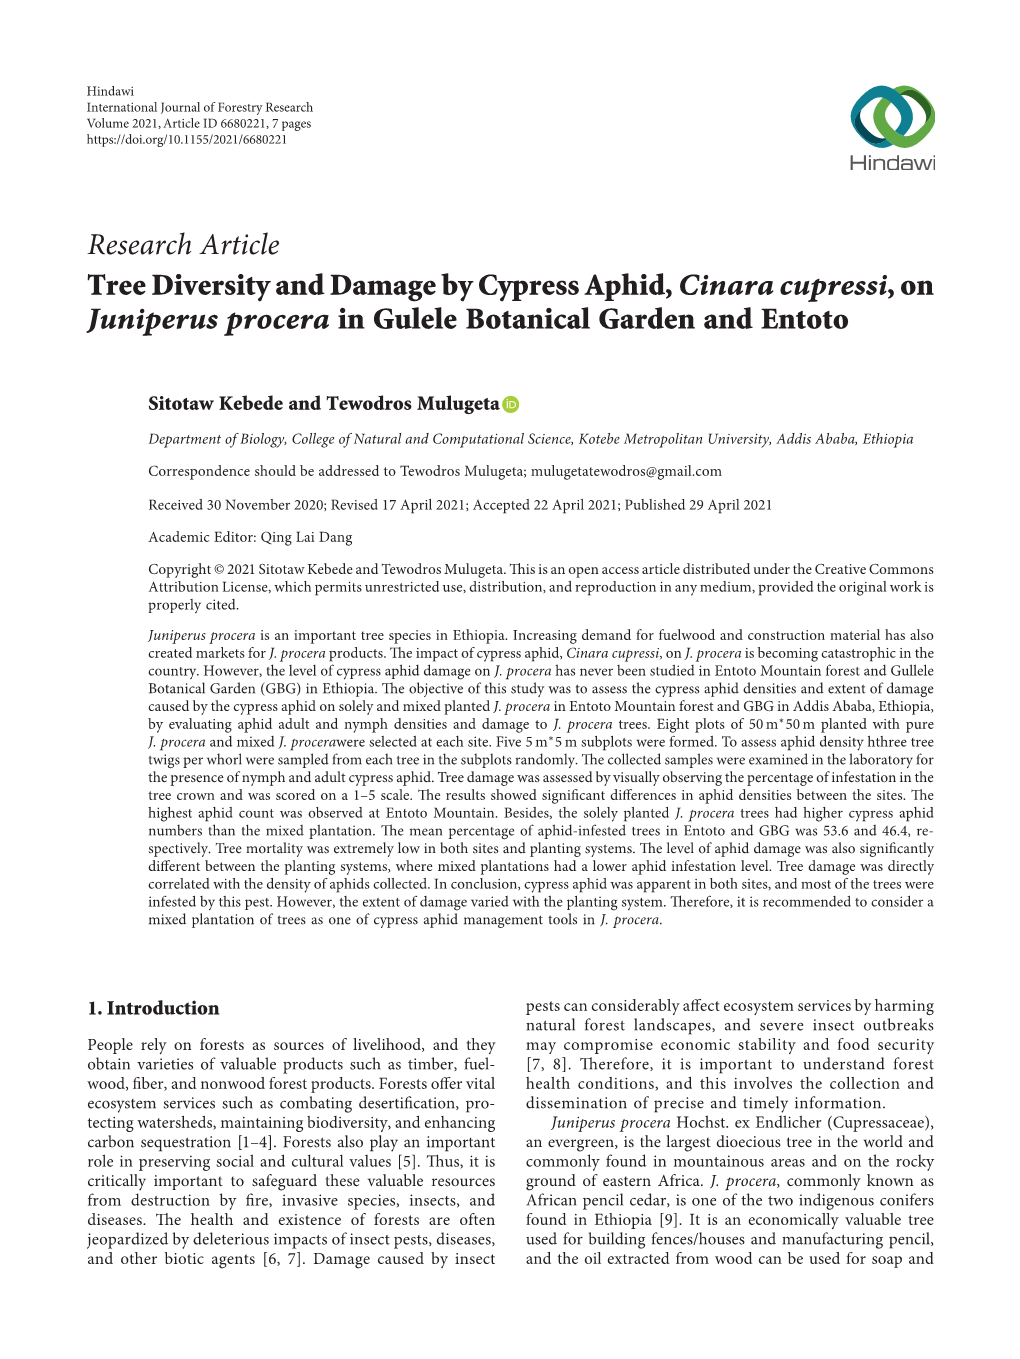 Tree Diversity and Damage by Cypress Aphid, Cinara Cupressi, on Juniperus Procera in Gulele Botanical Garden and Entoto